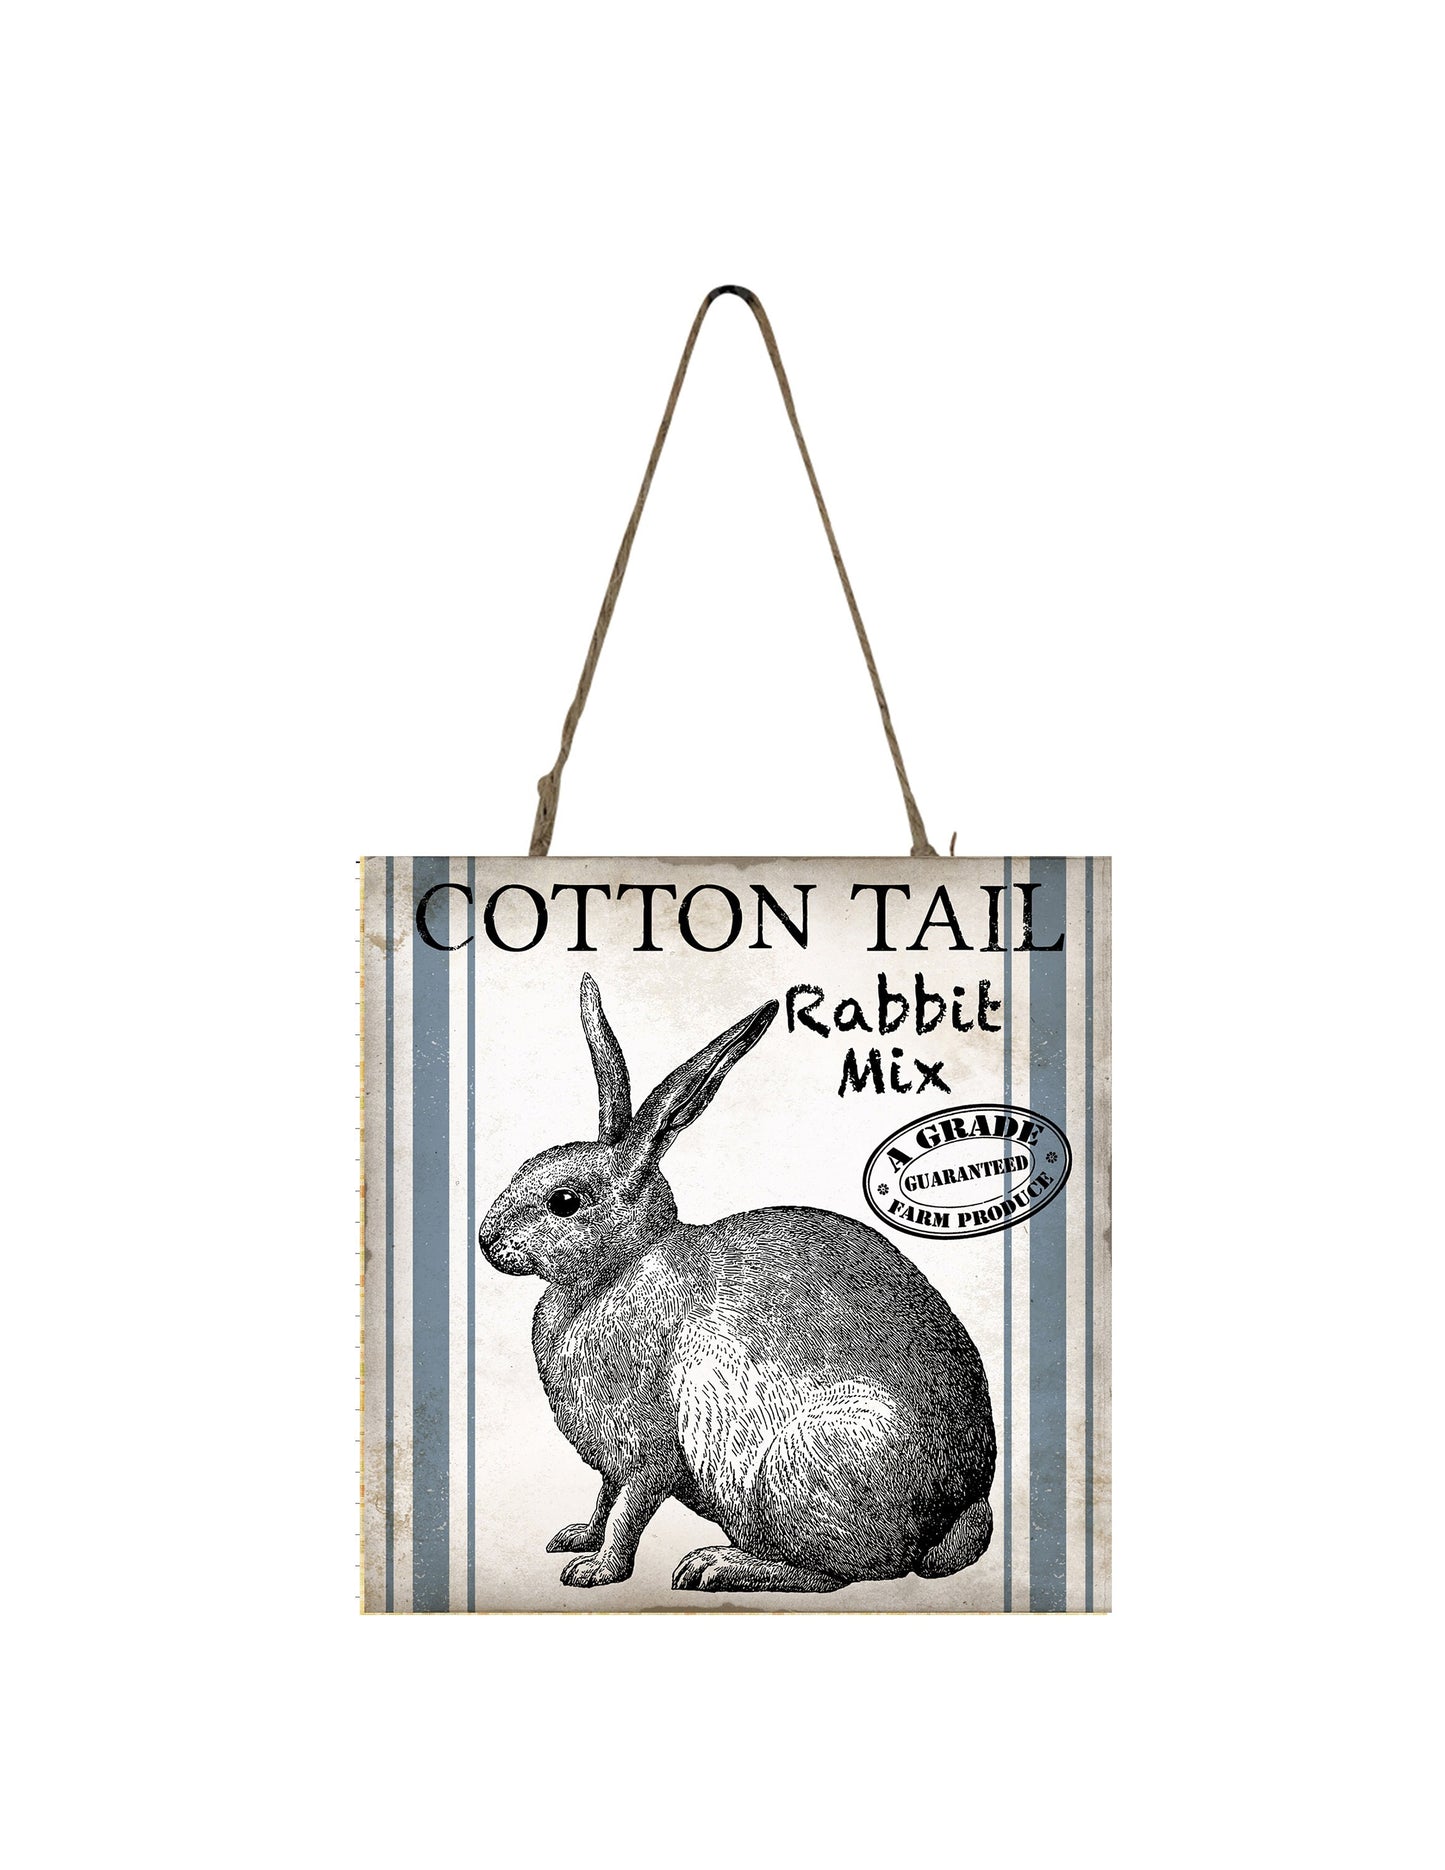 Cotton Tail Rabbit Mix Printed Handmade Wood Small Sign